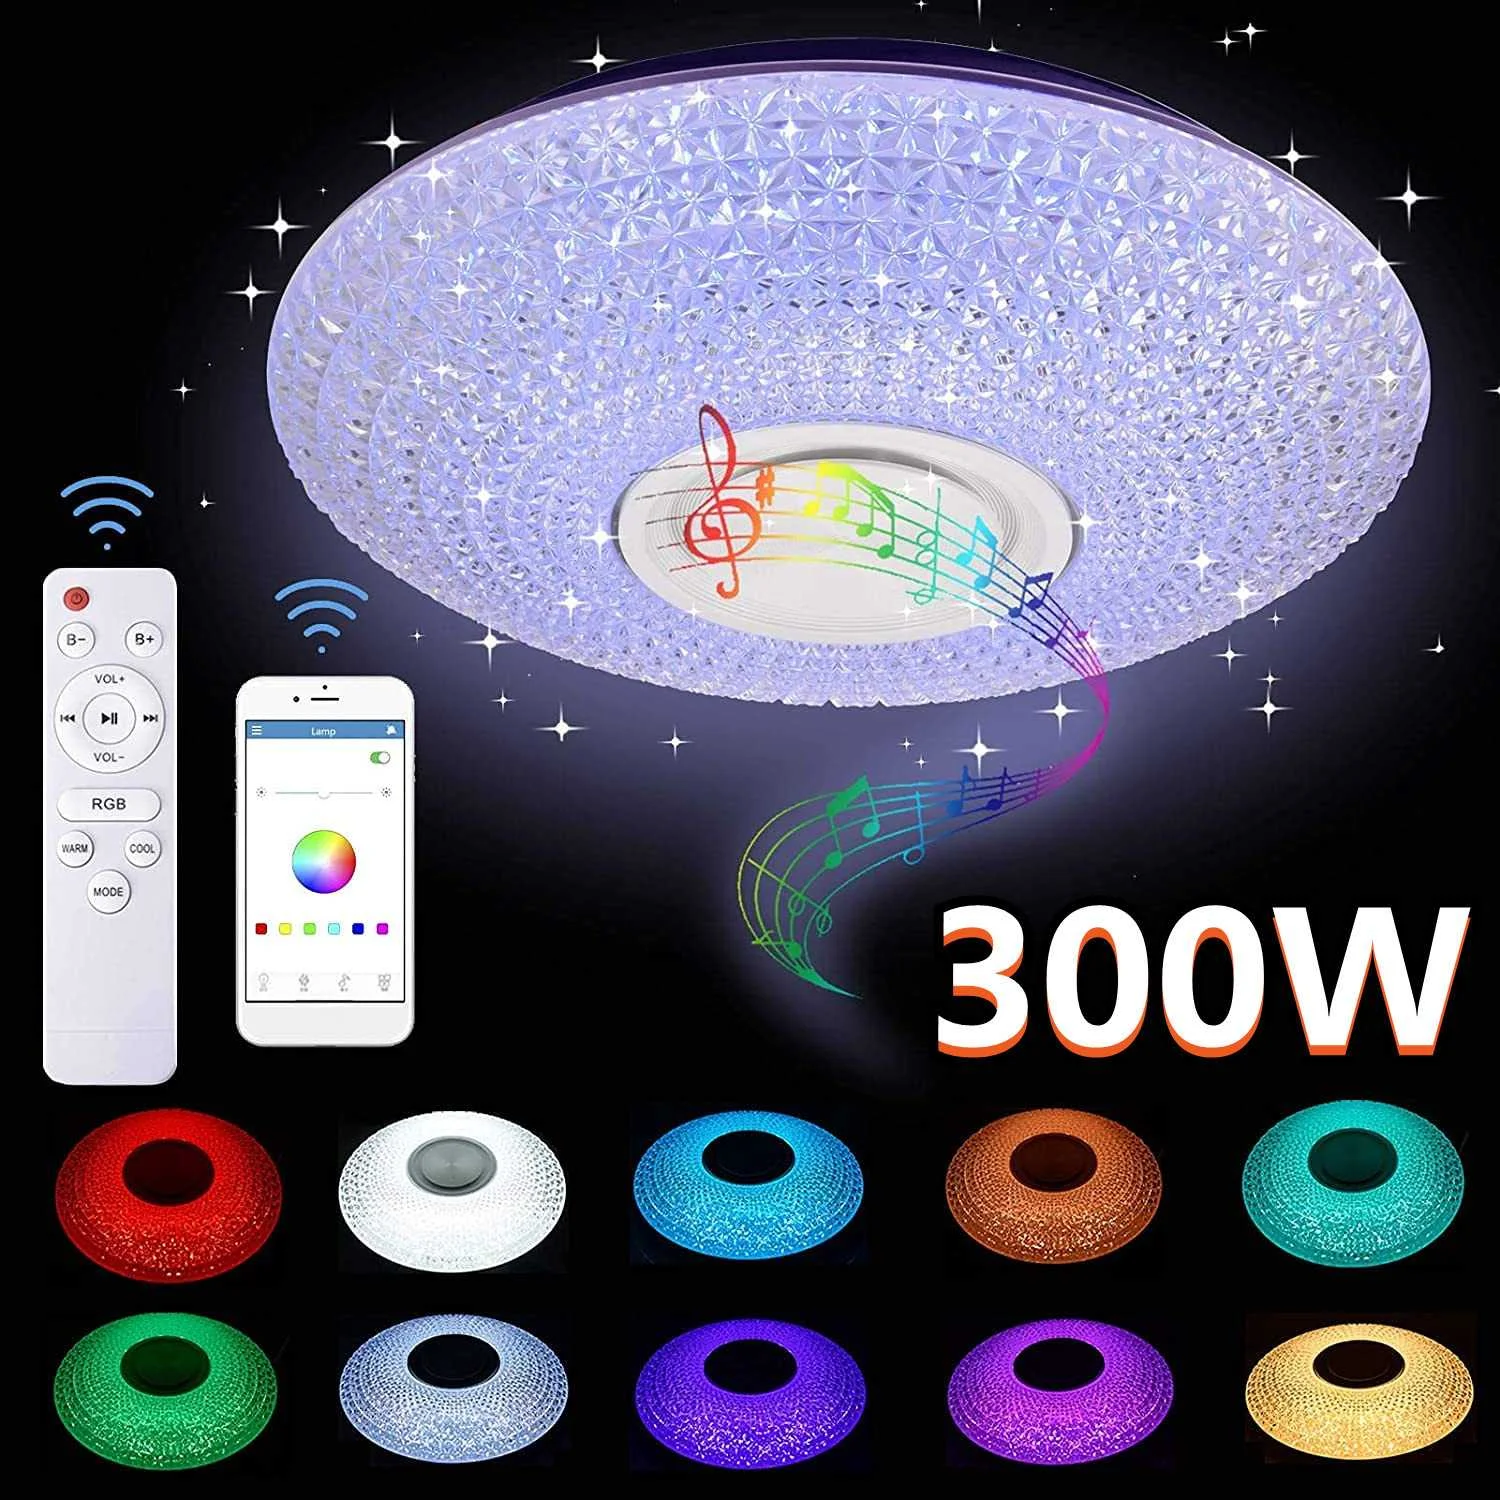 

300W WIFI RGB LED Ceiling Light Dimmable bluetooth Music Light With Remote APP Control Bedroom Smart Ceiling Lamp AC85-265V